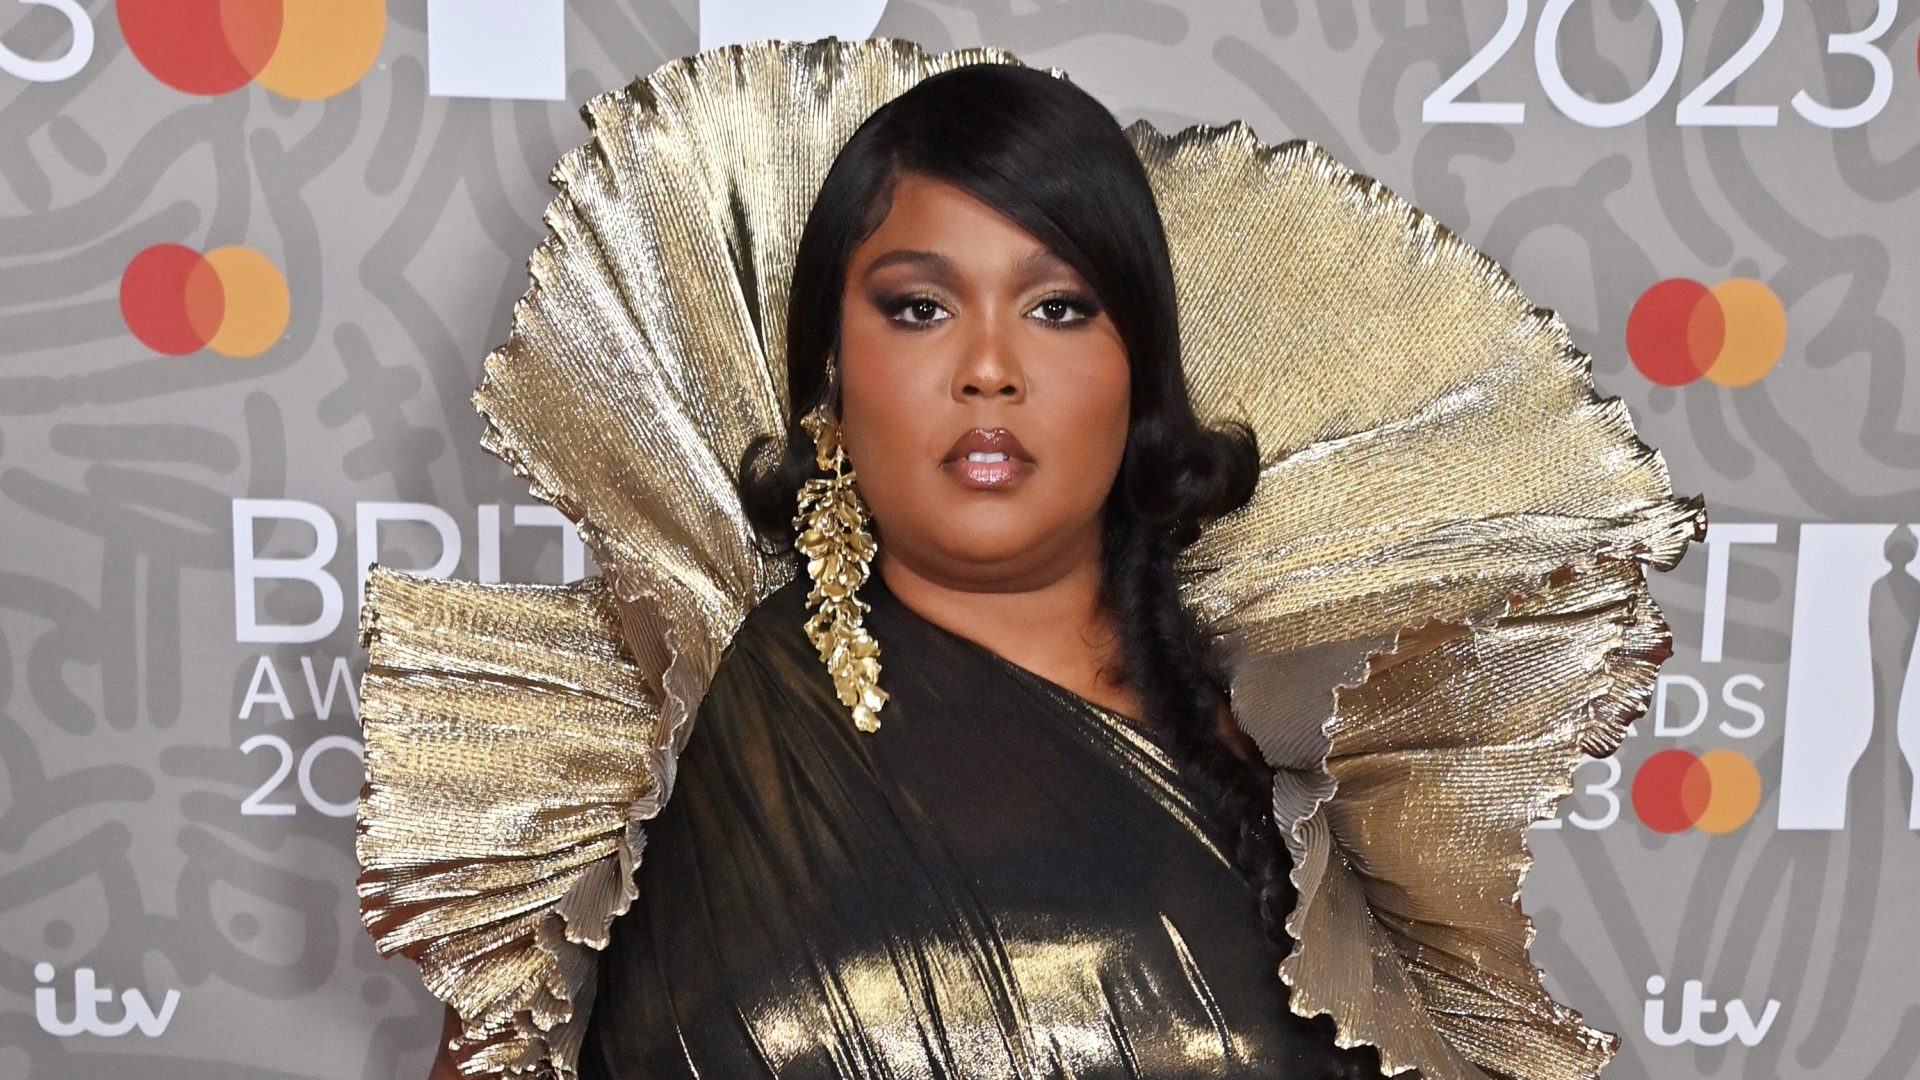 Social Media Reacts As More Industry Insiders Speak On Working With Lizzo: 'Canceling Lizzo Wasn’t On My Bingo Card For 2023'